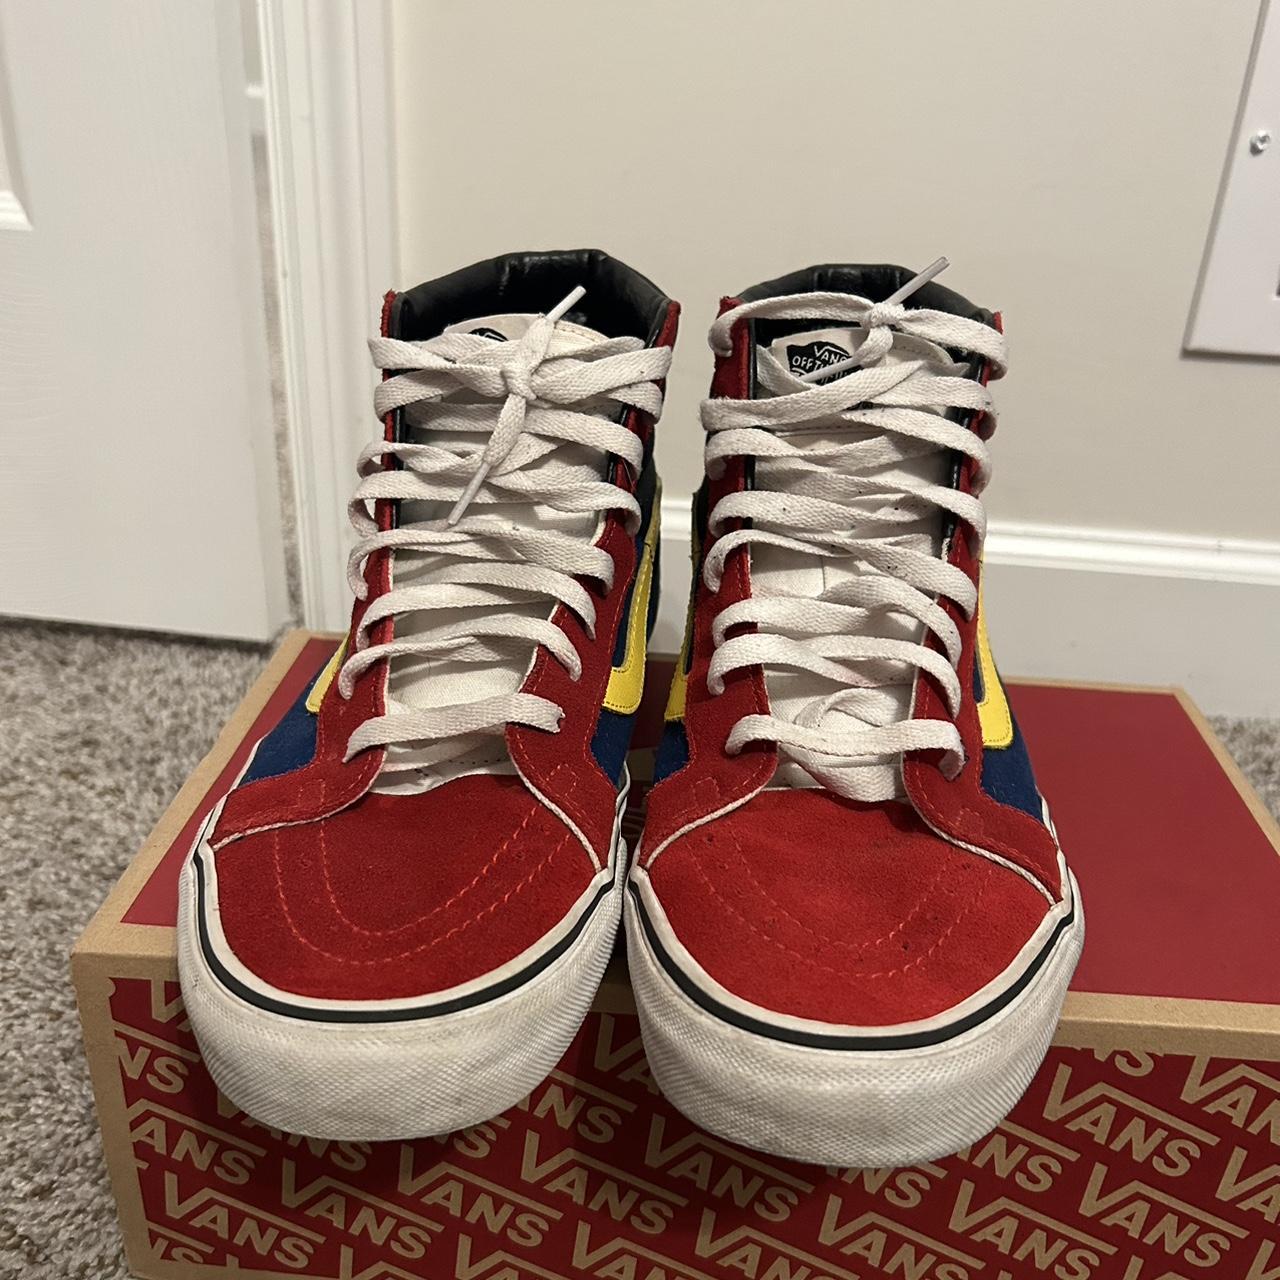 Vans Men's Red and Yellow Trainers